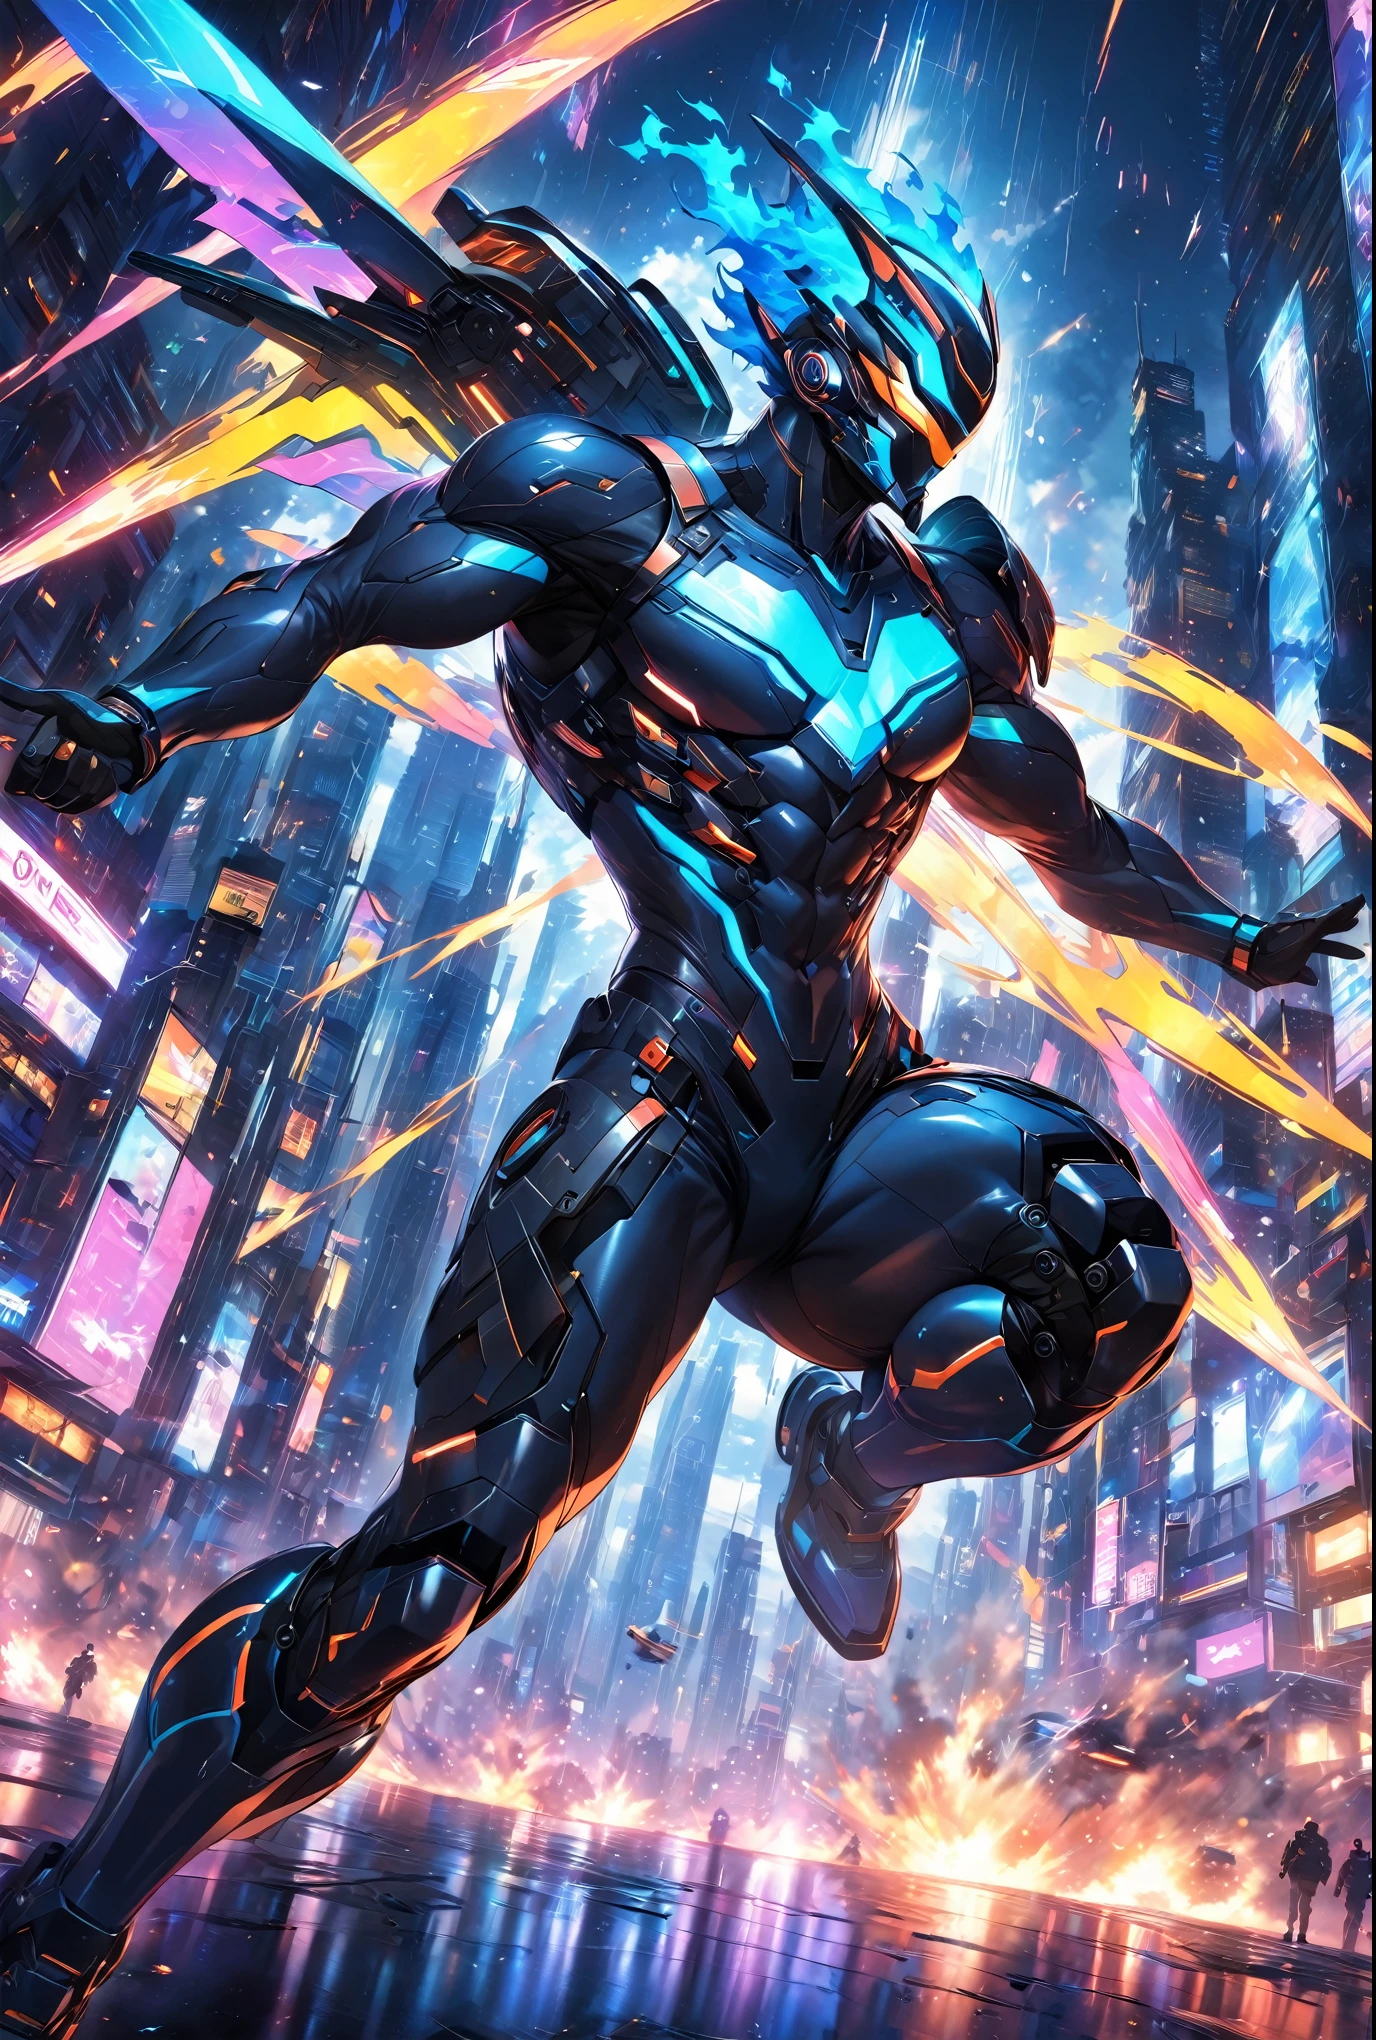 "A handsome man wearing a sleek, body-hugging combat suit in a cyberpunk setting. The suit is crafted from high-durability, lightweight materials, featuring an ergonomic design with vibrant neon lines and patterns in a variety of colors, including electric blue, neon green, fiery red, and bright purple, all tracing the contours of his muscular physique. The suit includes reinforced joints and embedded sensors, seamlessly integrated into the fabric. He has no helmet, revealing his sharp features and intense expression, with short, stylishly tousled hair. The scene is set in a chaotic urban battlefield, illuminated by a cacophony of neon lights and holographic advertisements. The background features towering skyscrapers and flying vehicles, with vibrant, colorful lights reflecting off the wet surfaces. In the midst of combat, explosions and energy blasts create dynamic lighting effects, casting dramatic shadows and highlighting the action-packed atmosphere."
